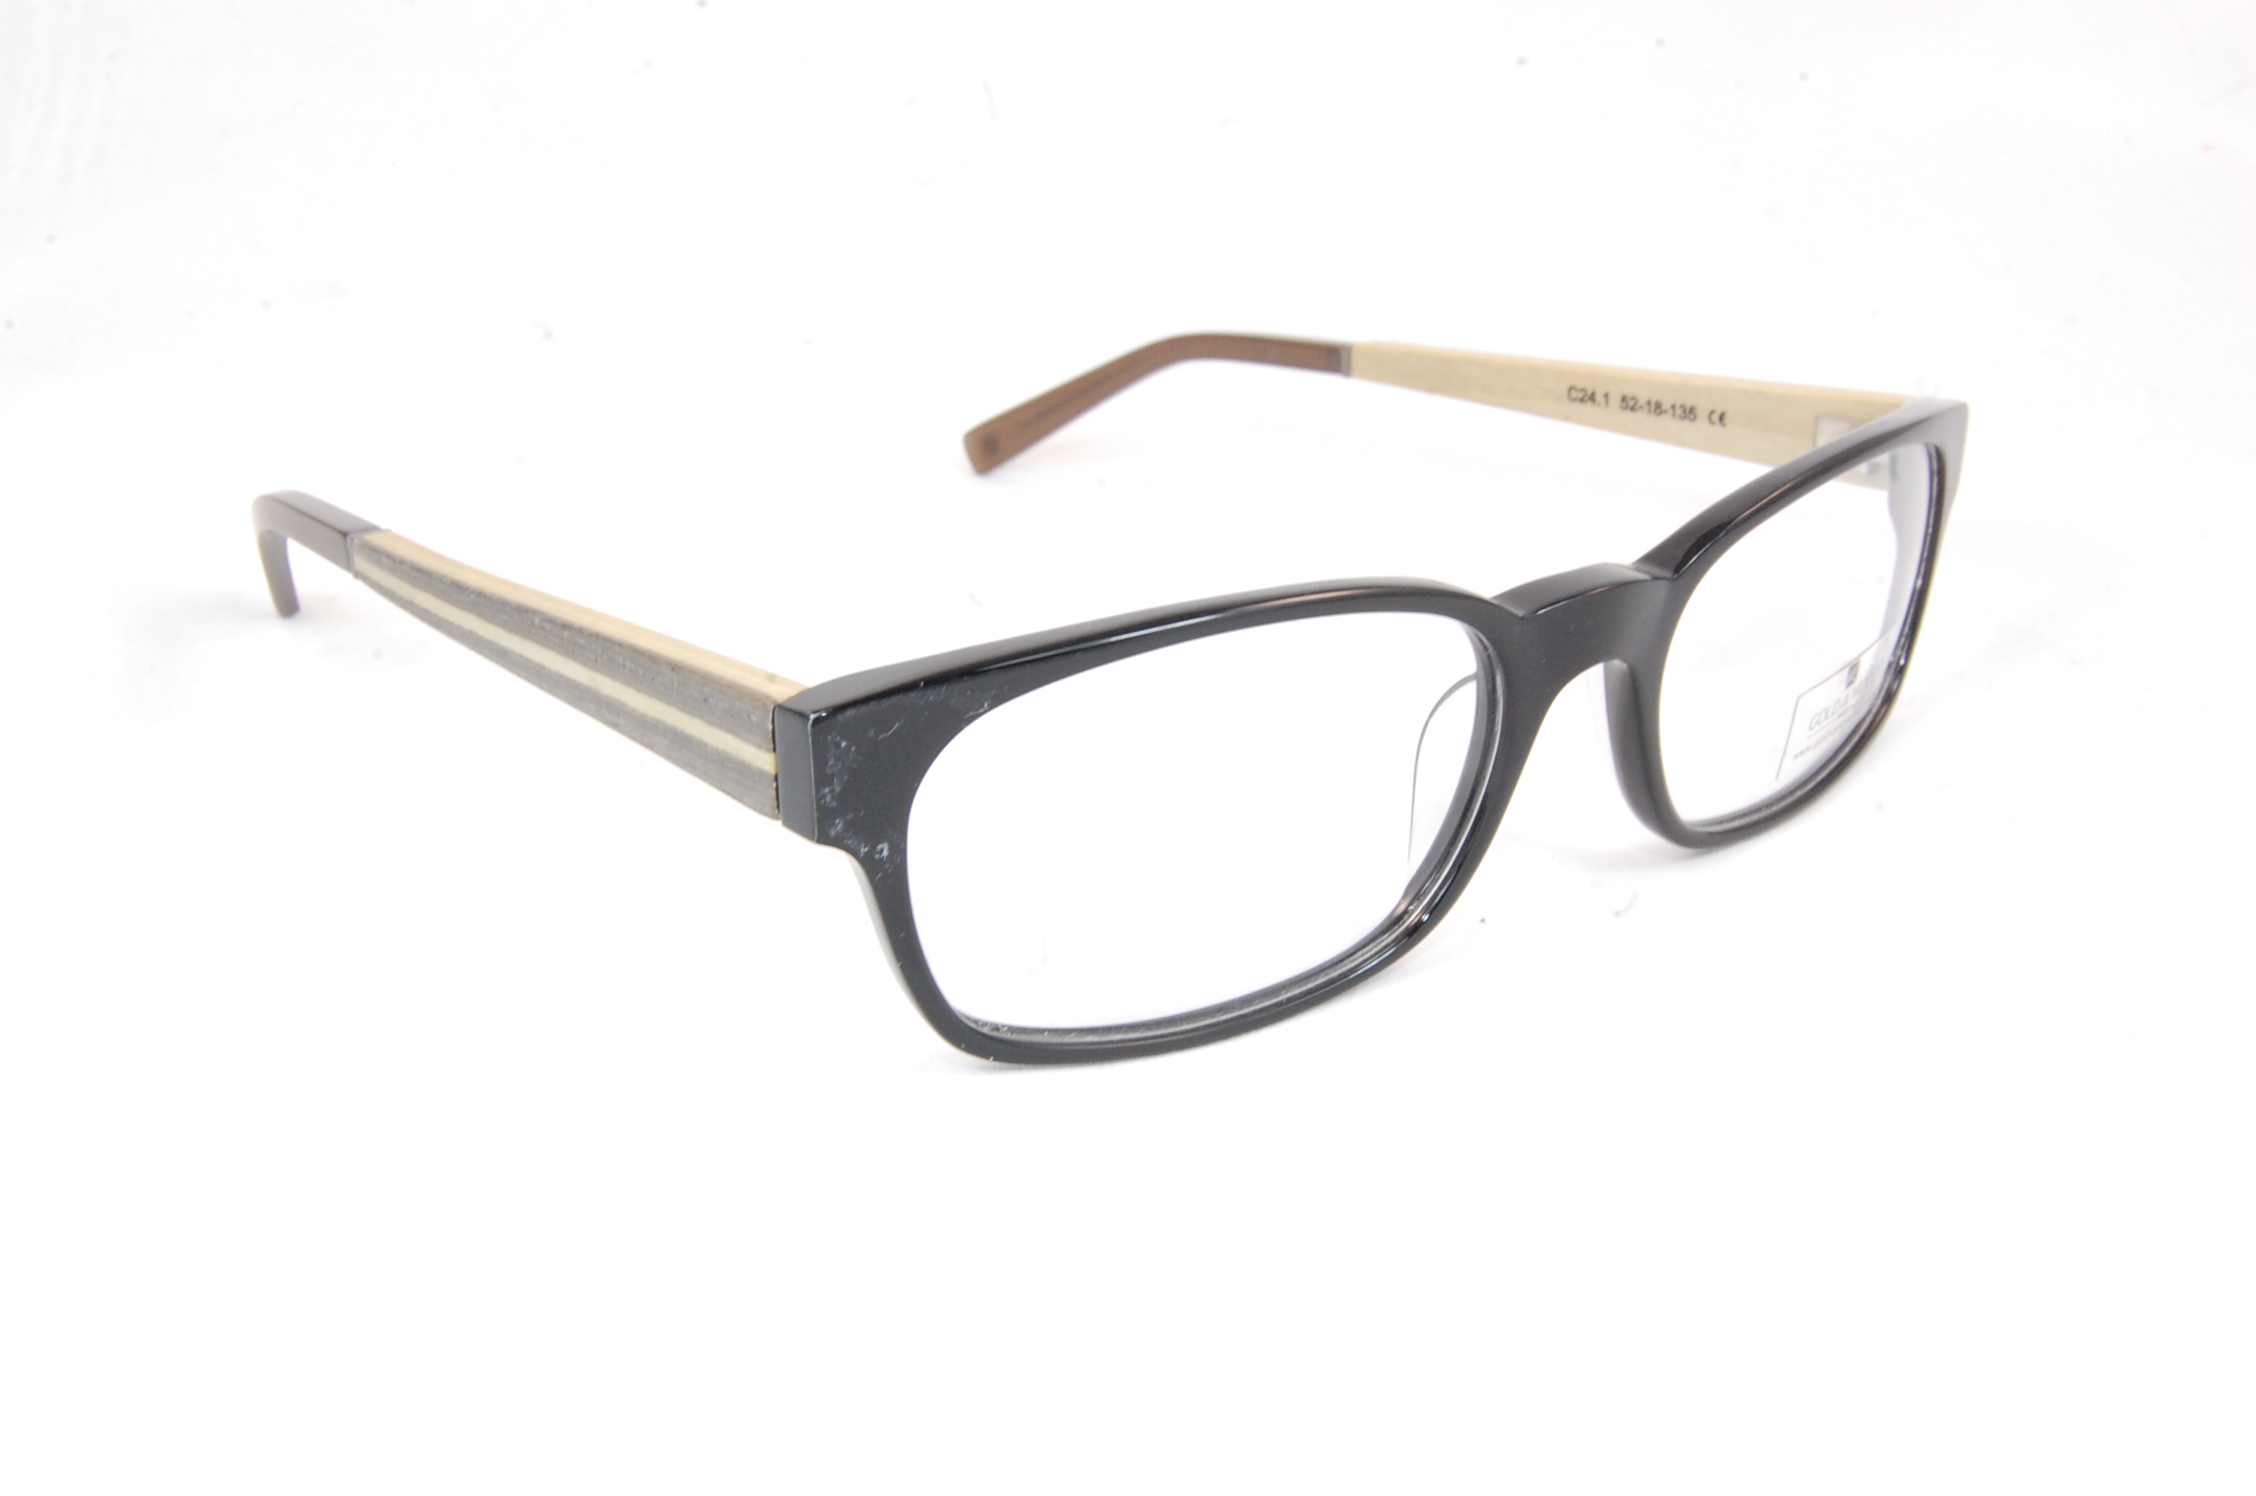 GOLD & WOOD OPTIQUE 10/10 FACHES THUMESNIL